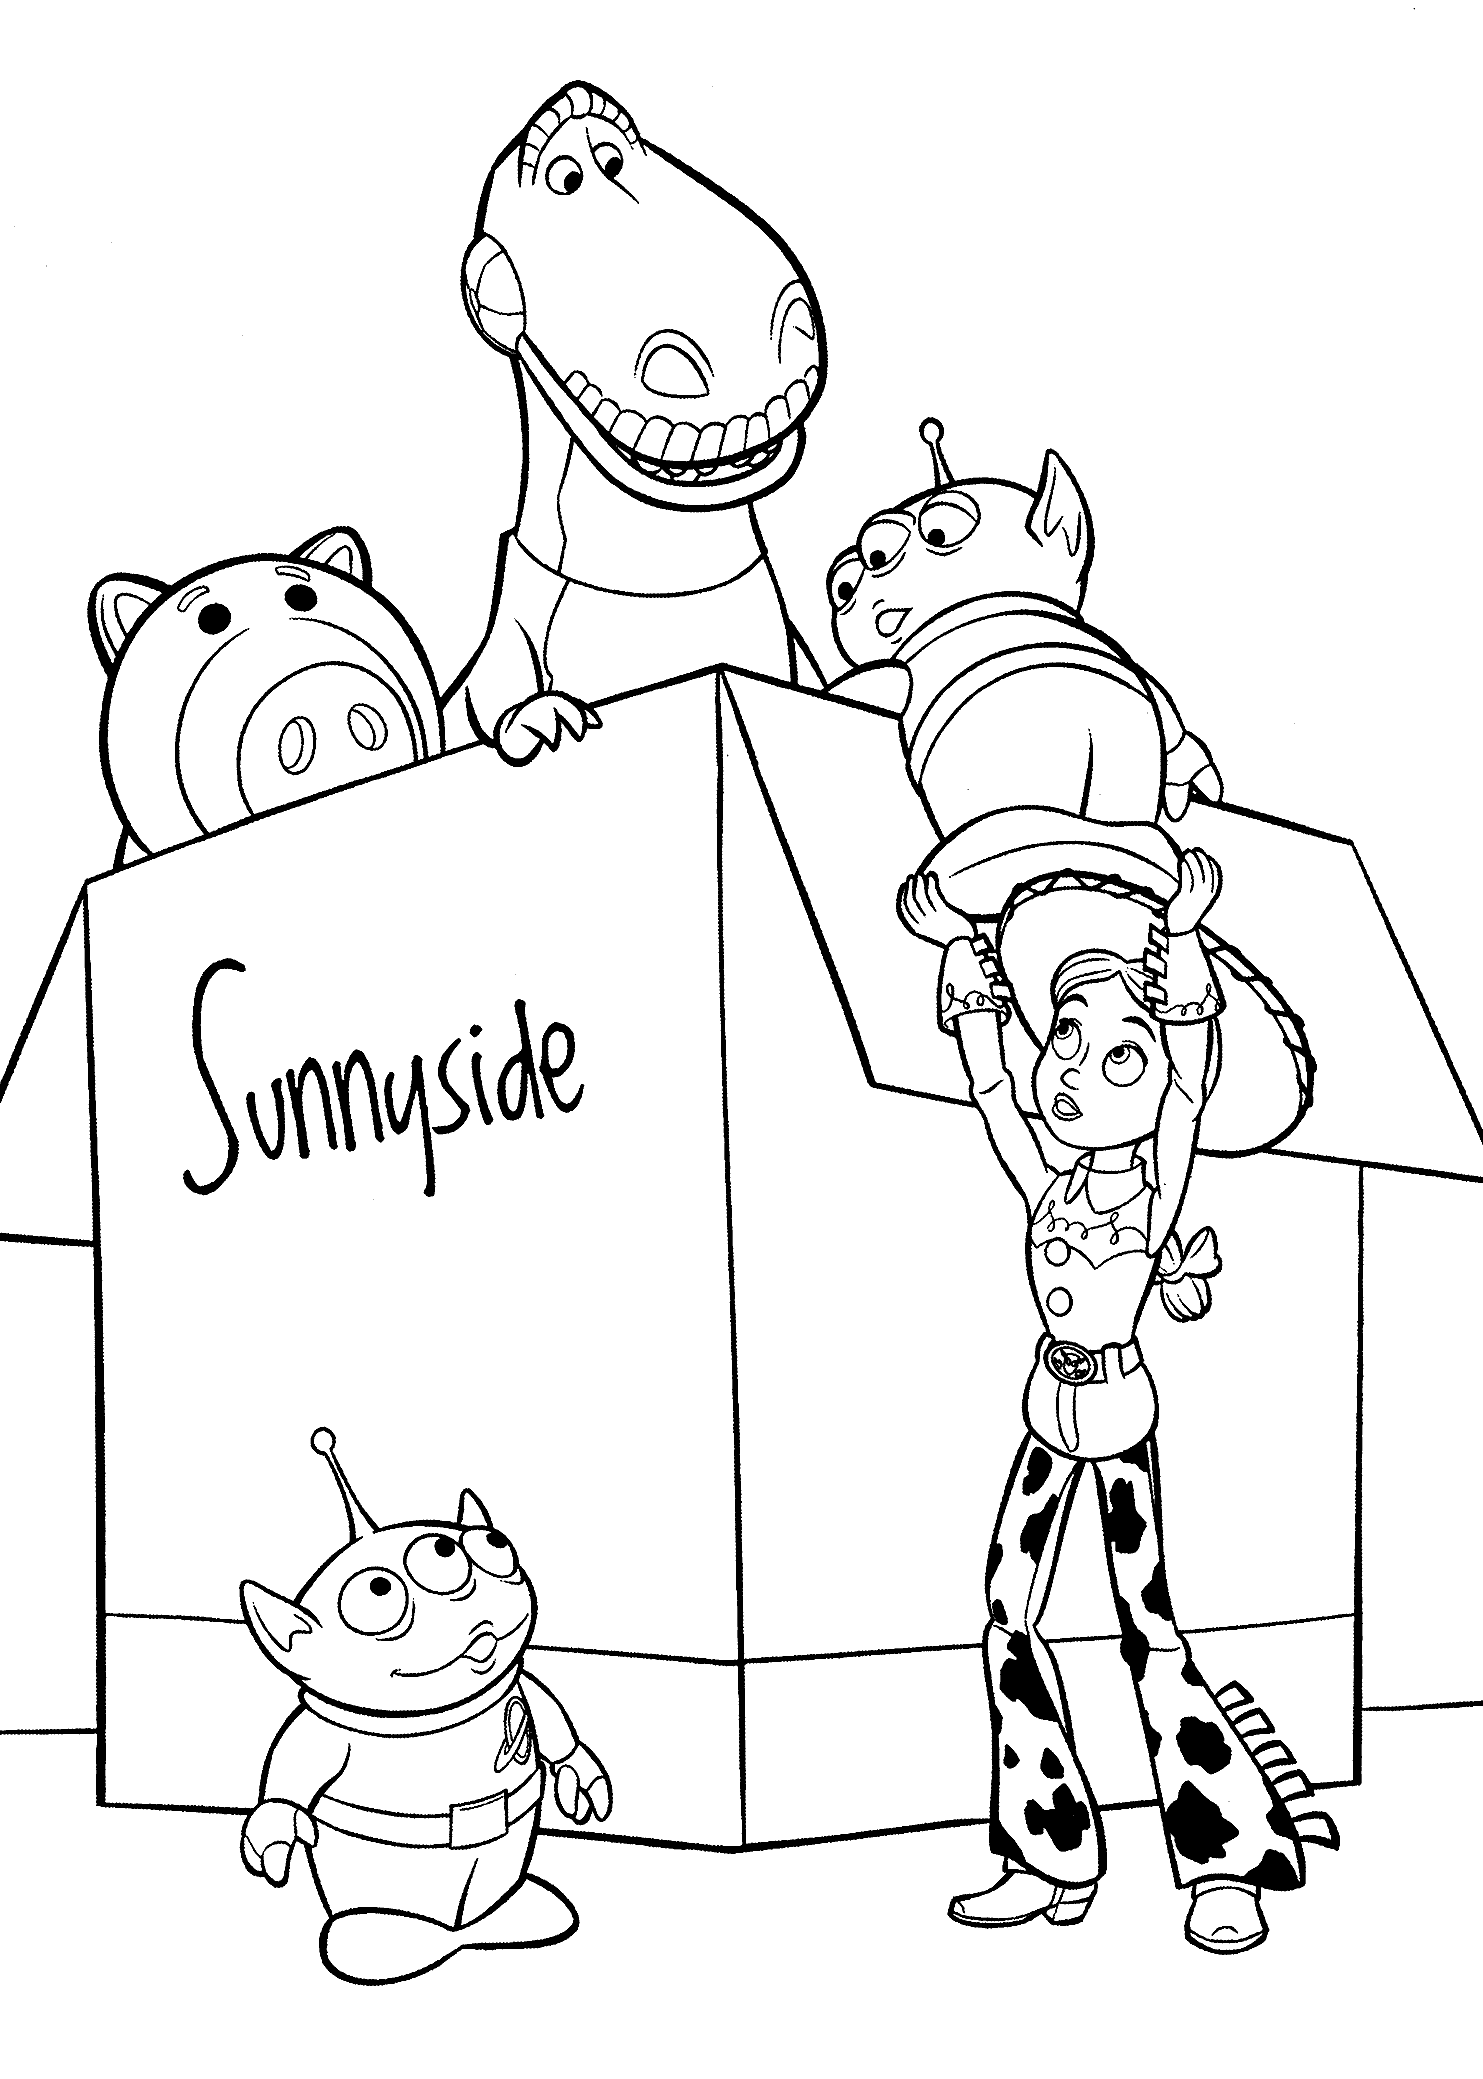 Toy story coloring pages printable for free download